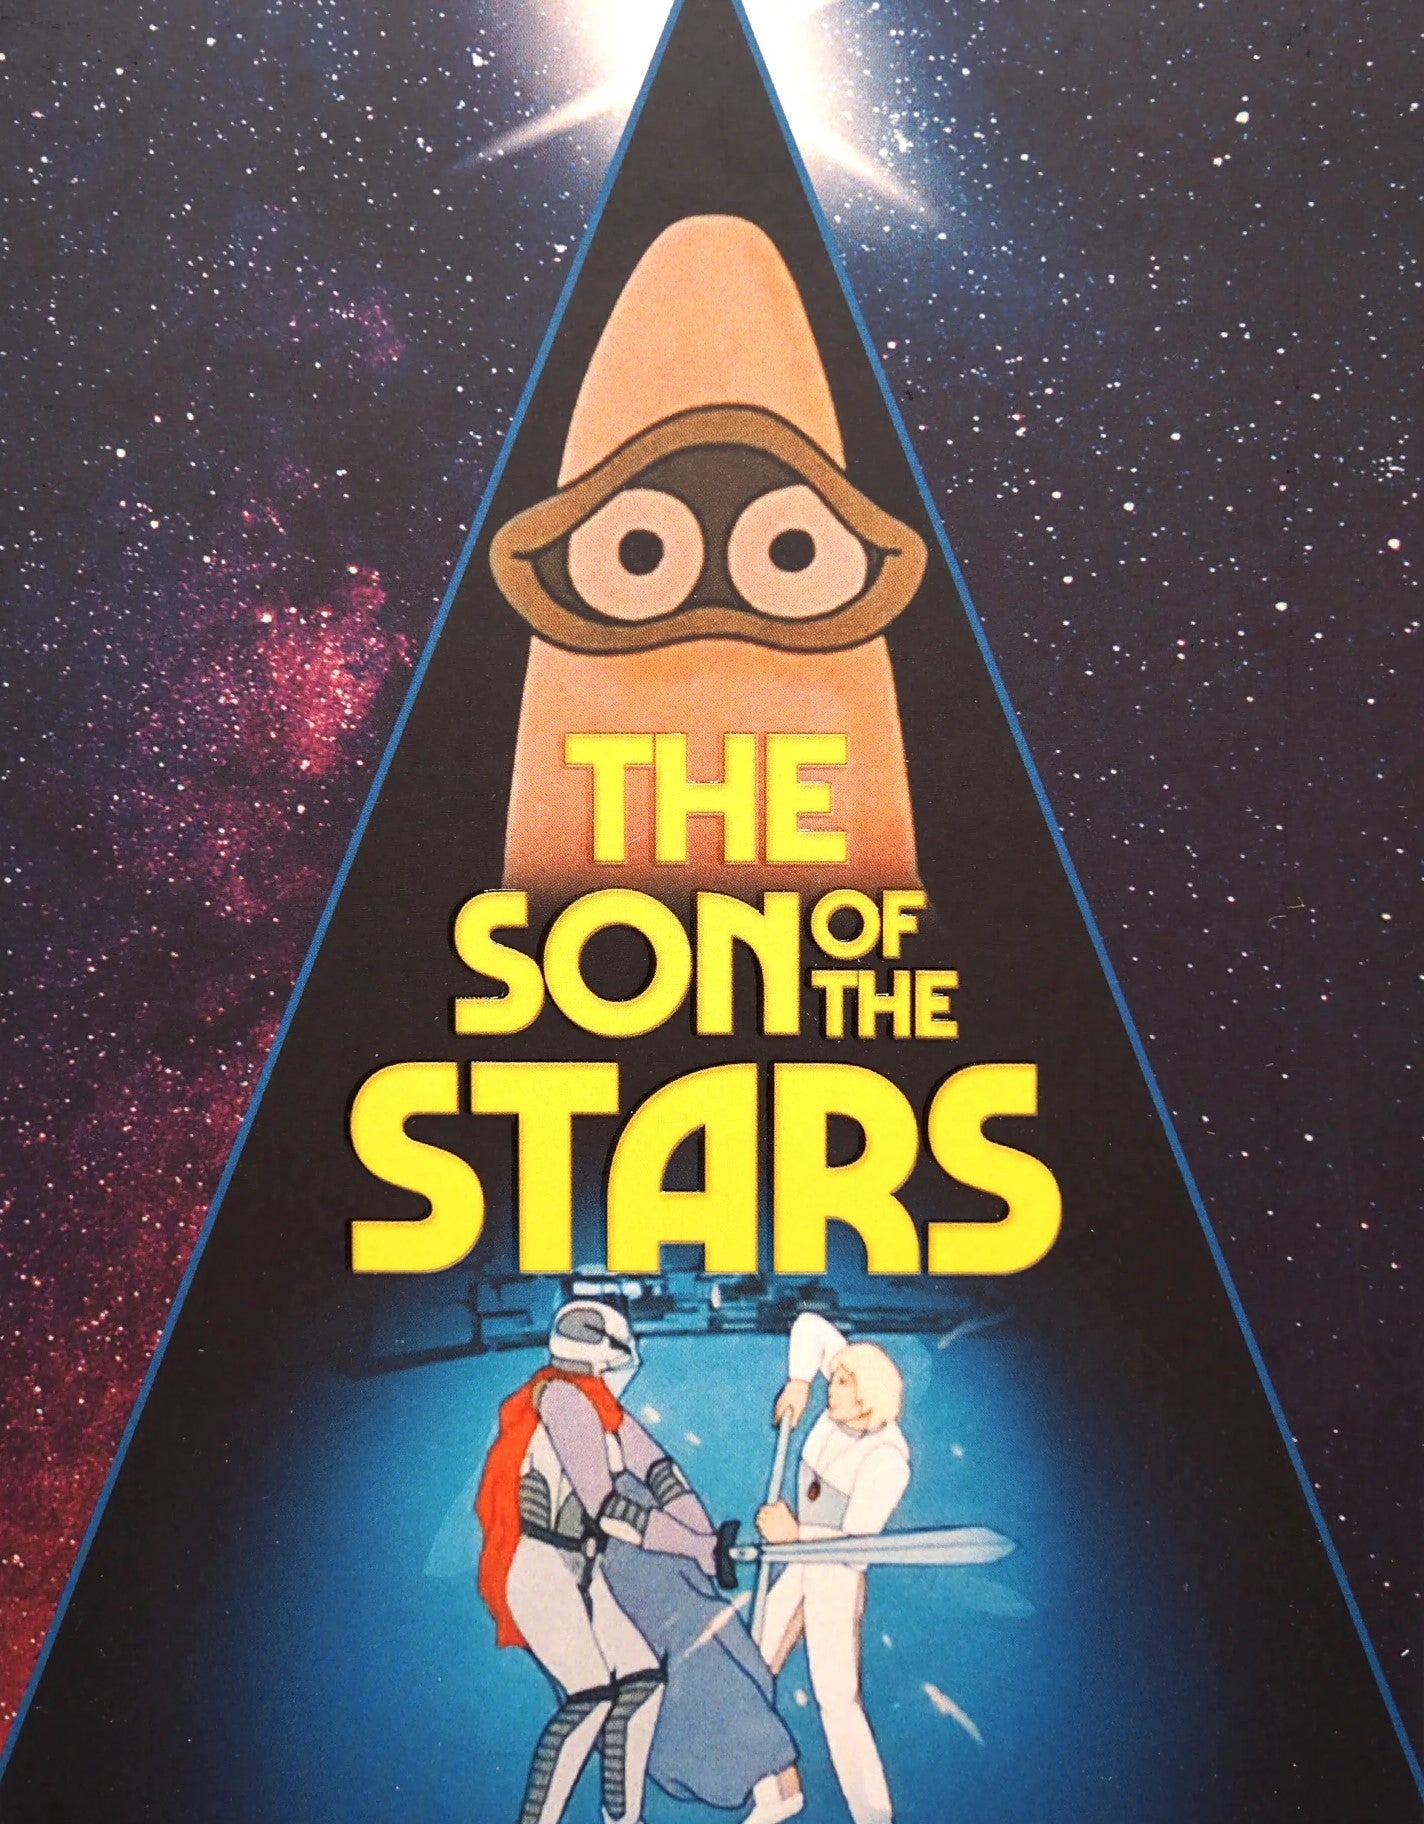 THE SON OF THE STARS (LIMITED EDITION) BLU-RAY